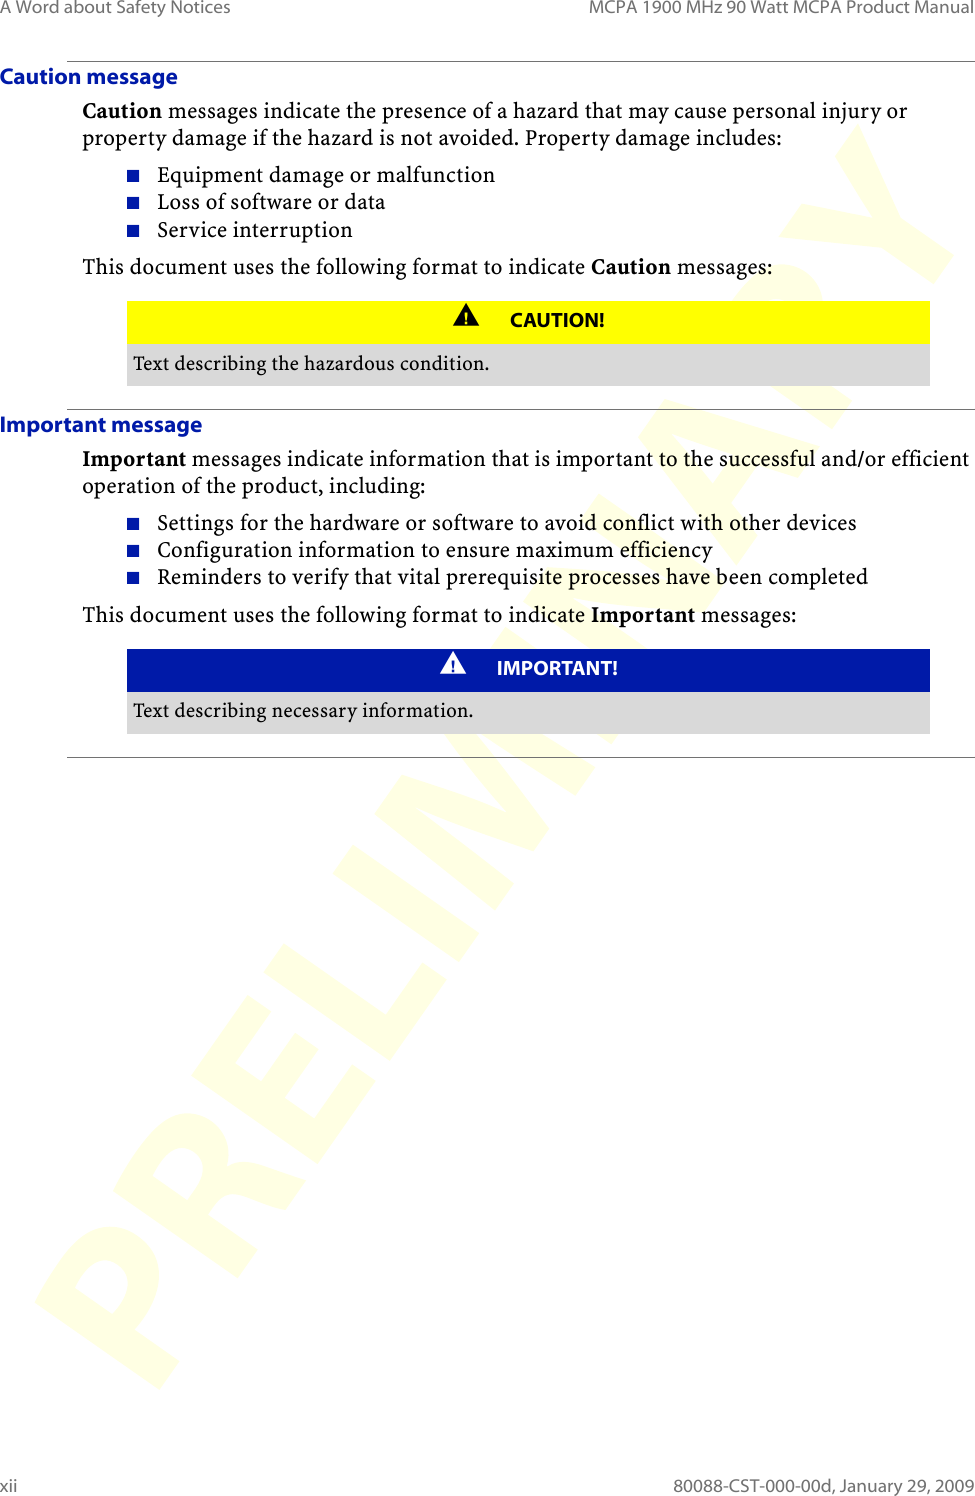 A Word about Safety Notices MCPA 1900 MHz 90 Watt MCPA Product Manualxii 80088-CST-000-00d, January 29, 2009Caution messageCaution messages indicate the presence of a hazard that may cause personal injury or property damage if the hazard is not avoided. Property damage includes:Equipment damage or malfunctionLoss of software or dataService interruptionThis document uses the following format to indicate Caution messages:Important messageImportant messages indicate information that is important to the successful and/or efficient operation of the product, including:Settings for the hardware or software to avoid conflict with other devicesConfiguration information to ensure maximum efficiencyReminders to verify that vital prerequisite processes have been completedThis document uses the following format to indicate Important messages: CAUTION!Text describing the hazardous condition.IMPORTANT!Text describing necessary information.